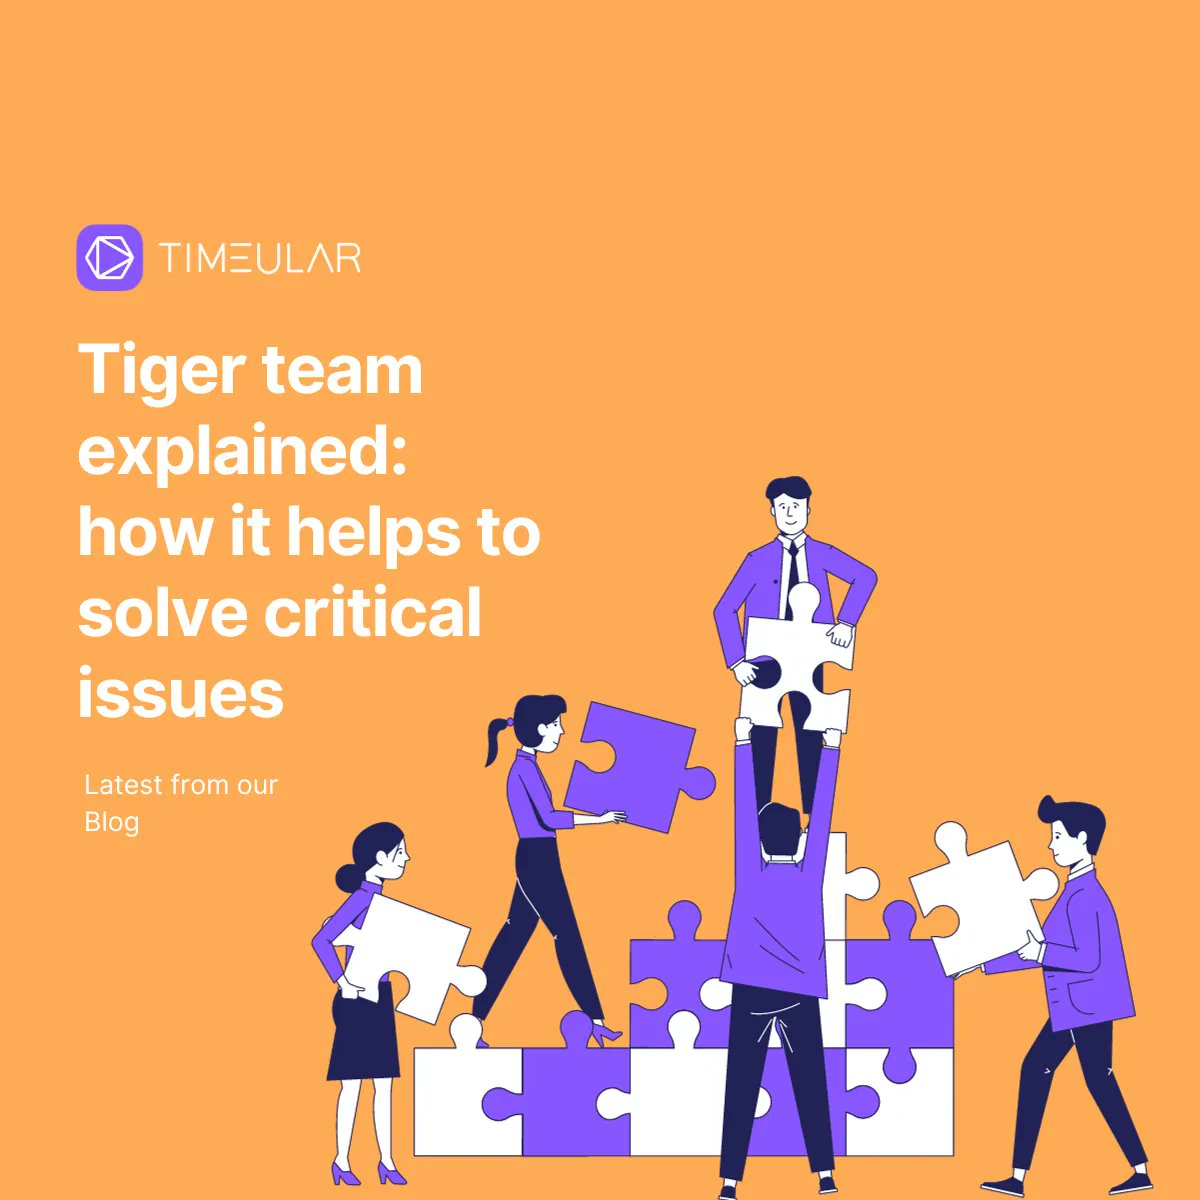 This cross-functional team is your ultimate solution for resolving critical problems seamlessly. Read more: buff.ly/3PnSPAp #tigerteam #teamwork